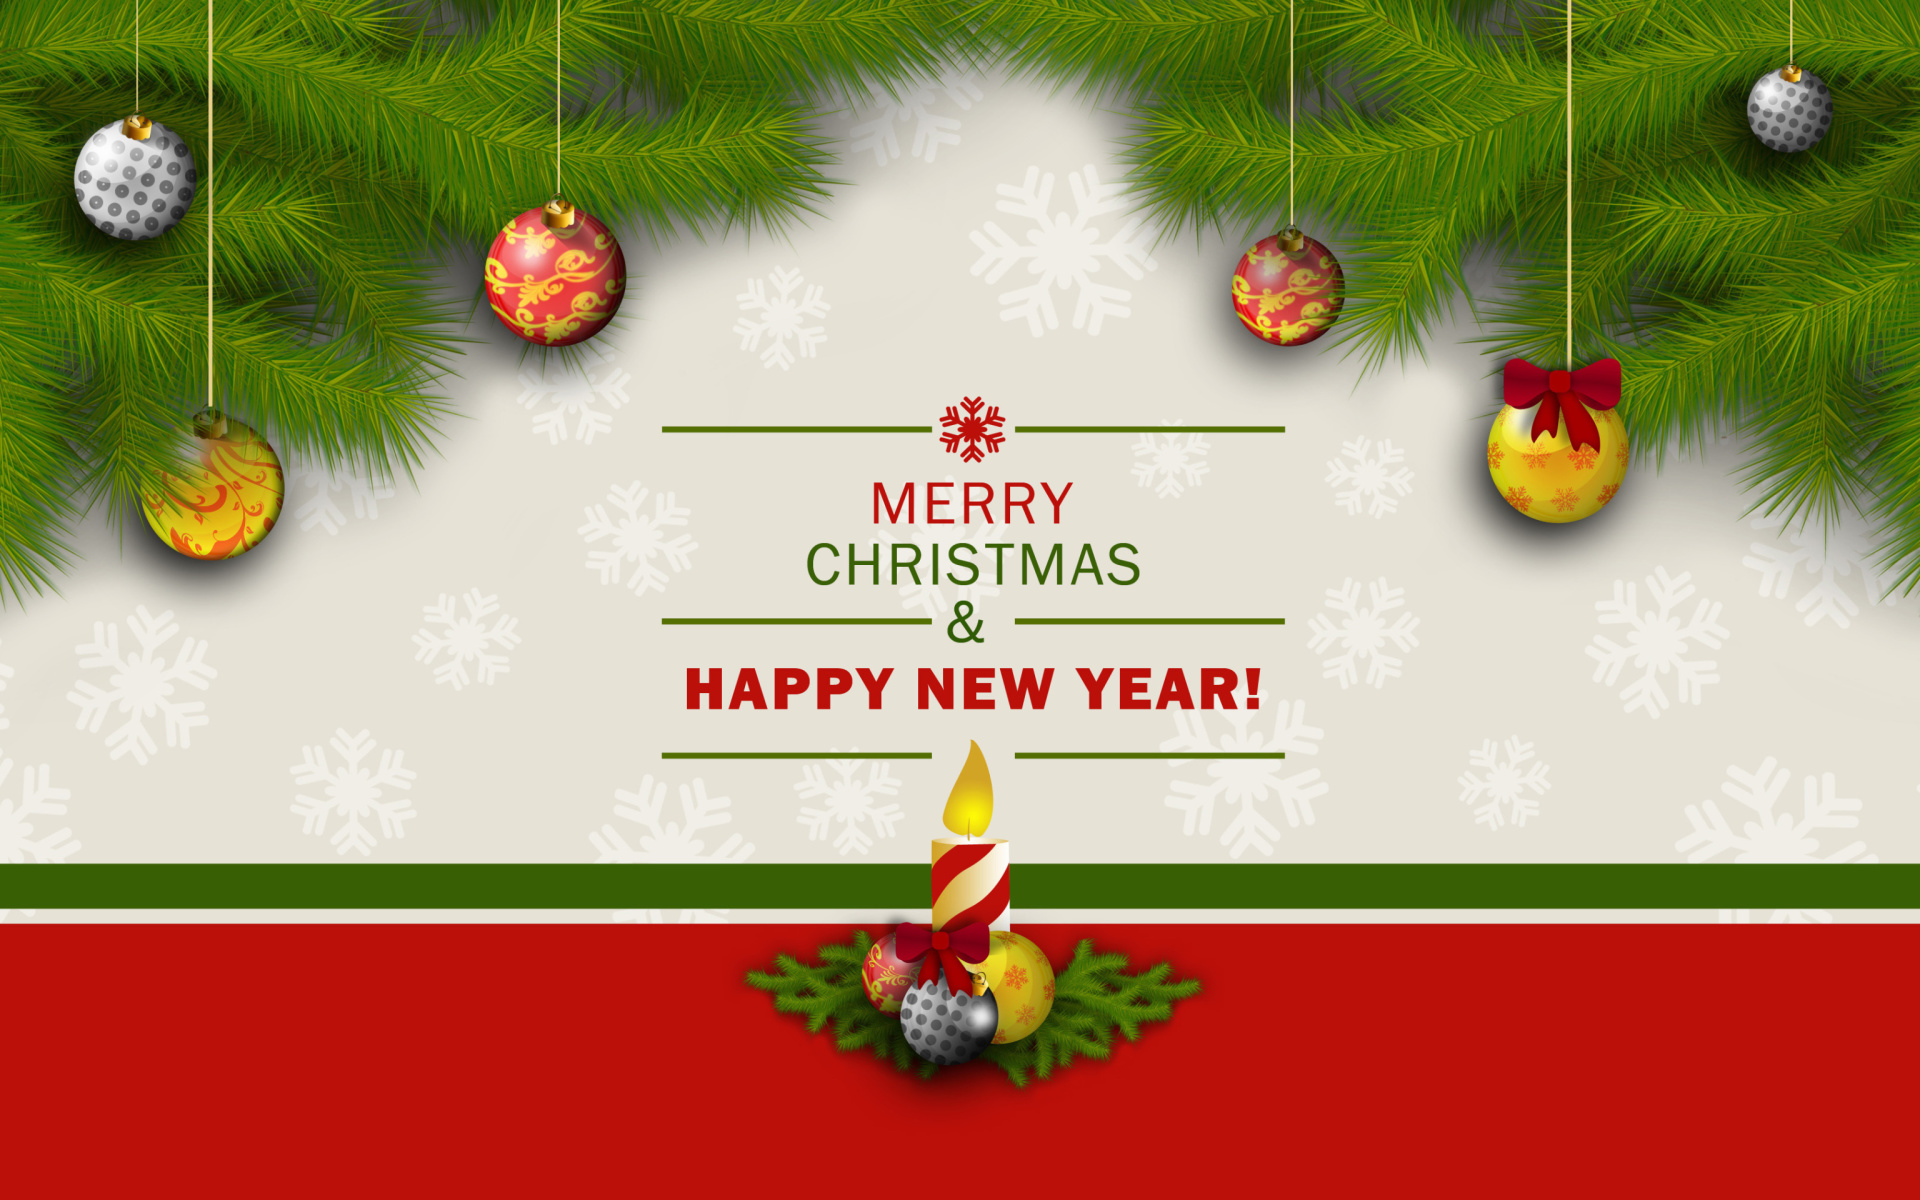 Merry Christmas and Happy New Year wallpaper 1920x1200